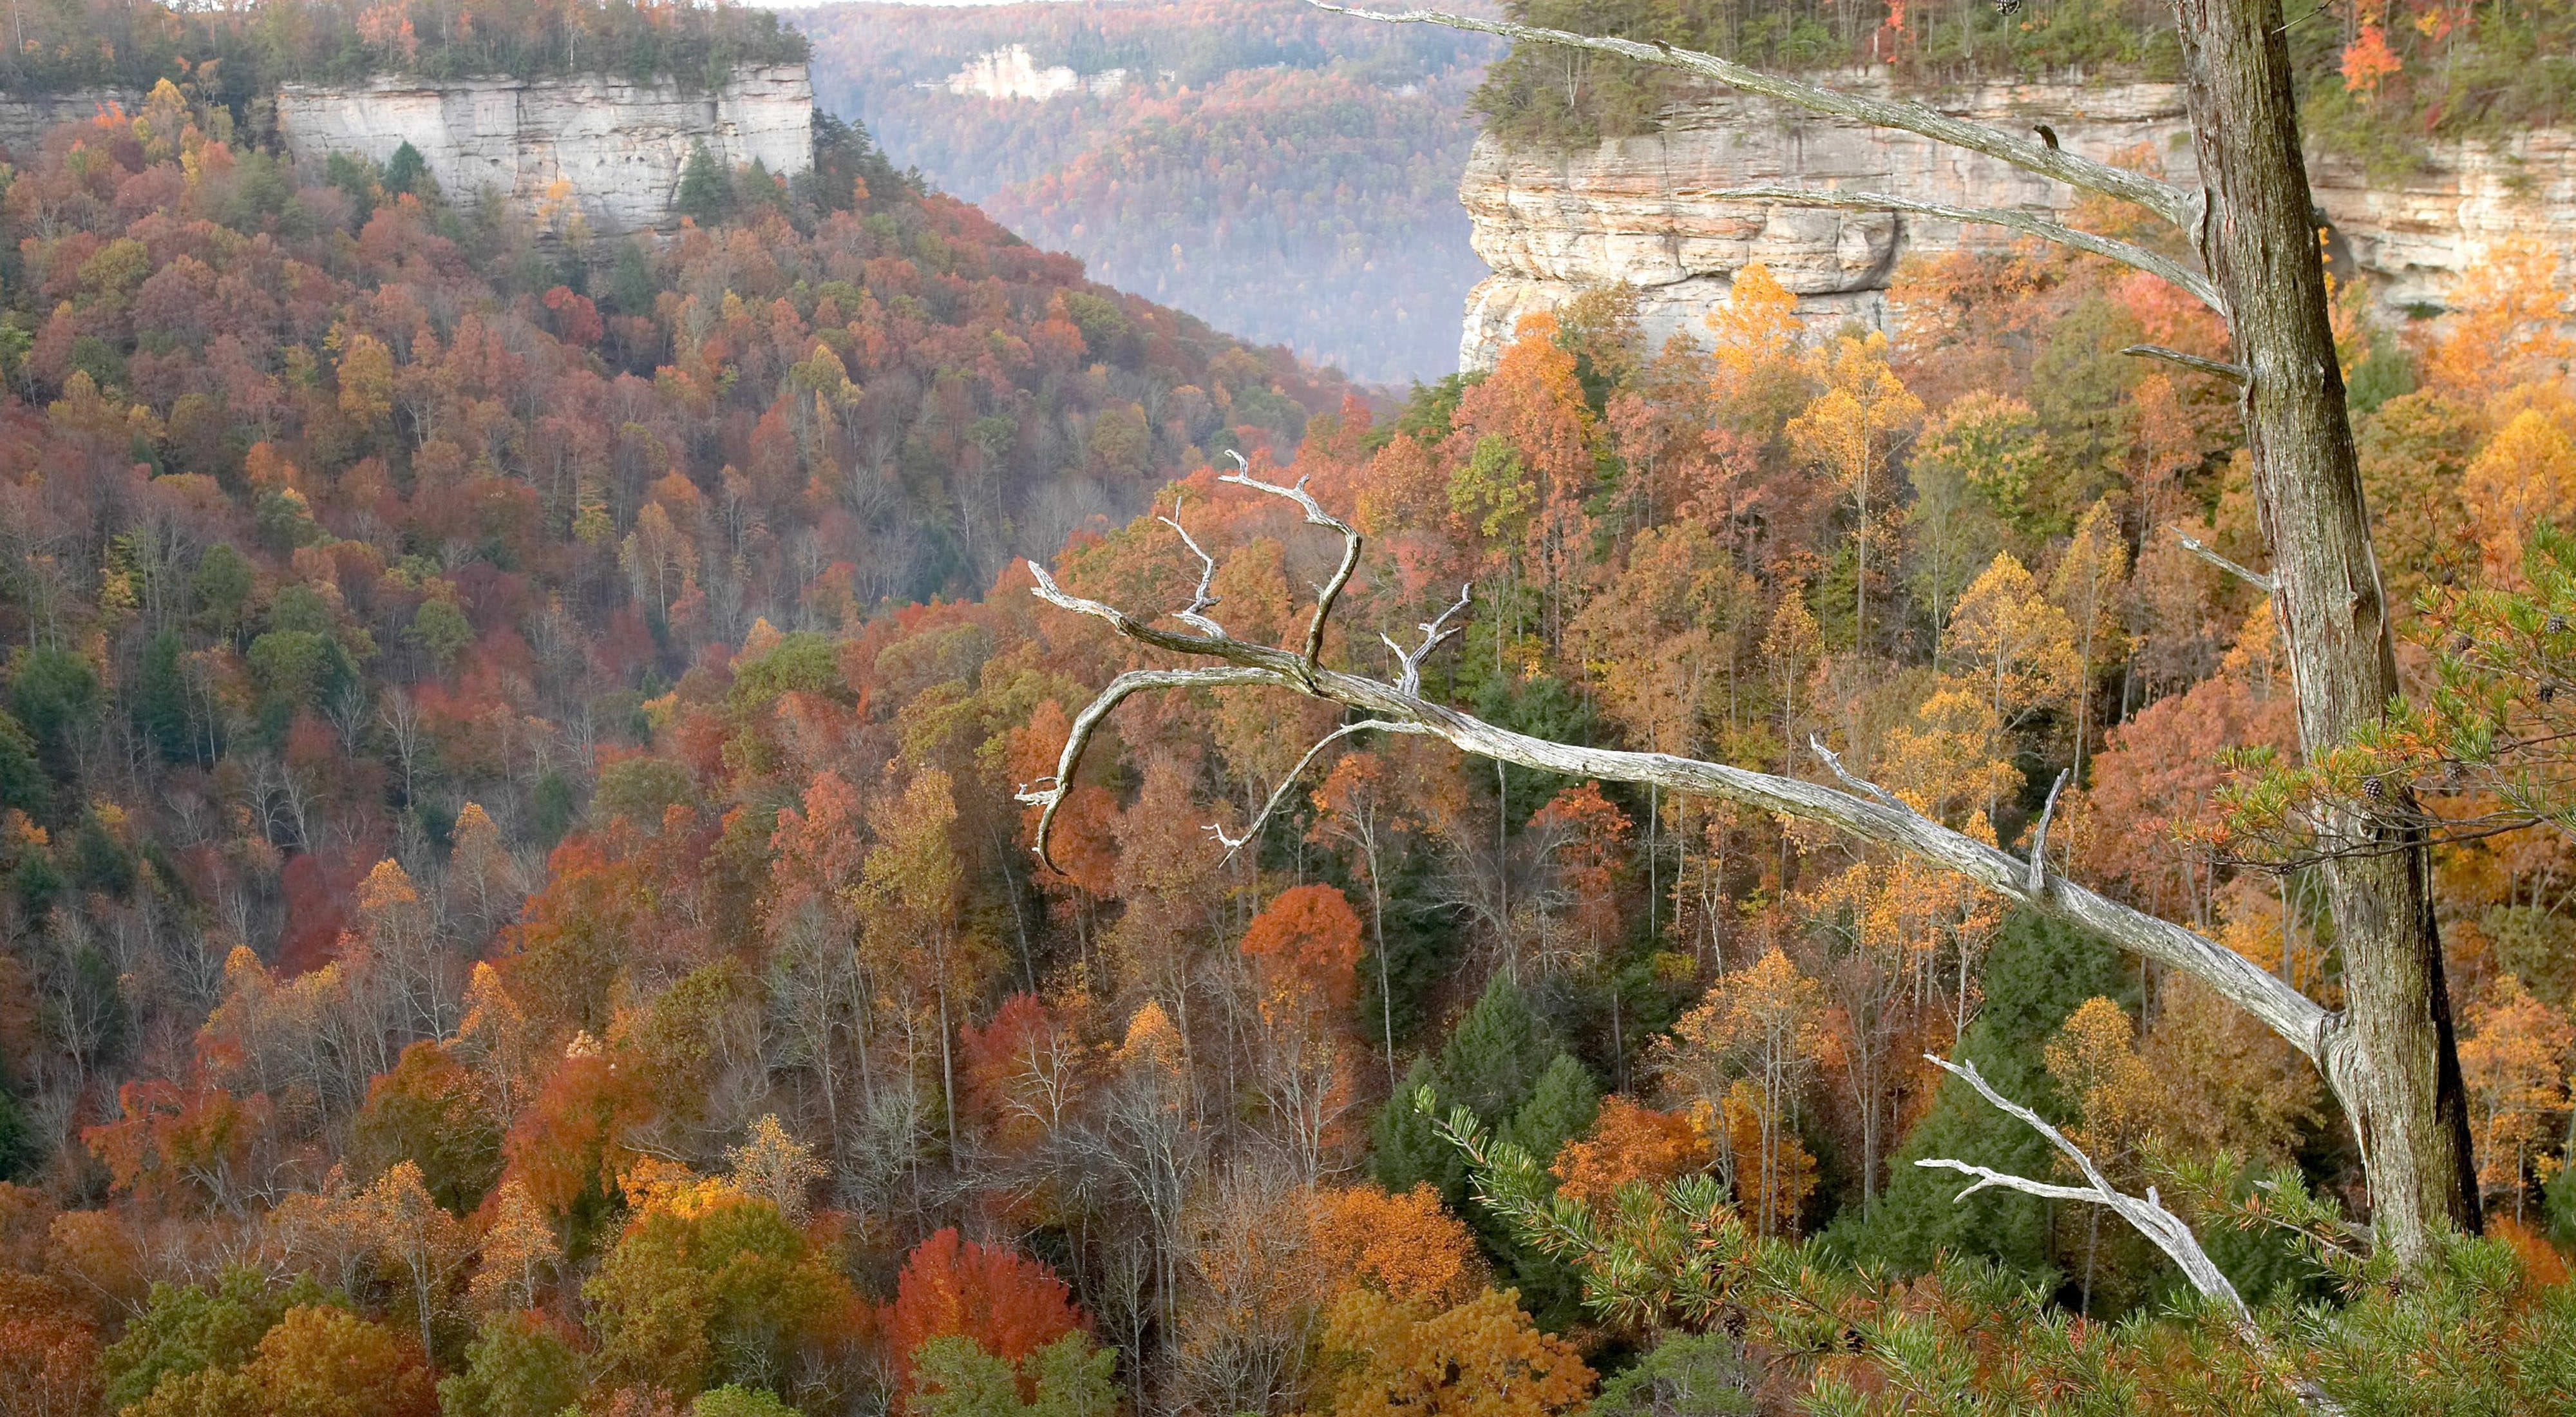 A high elevation view of the autumn forest and sheer canyon walls in Pogue Creek Canyon in Tennessee.